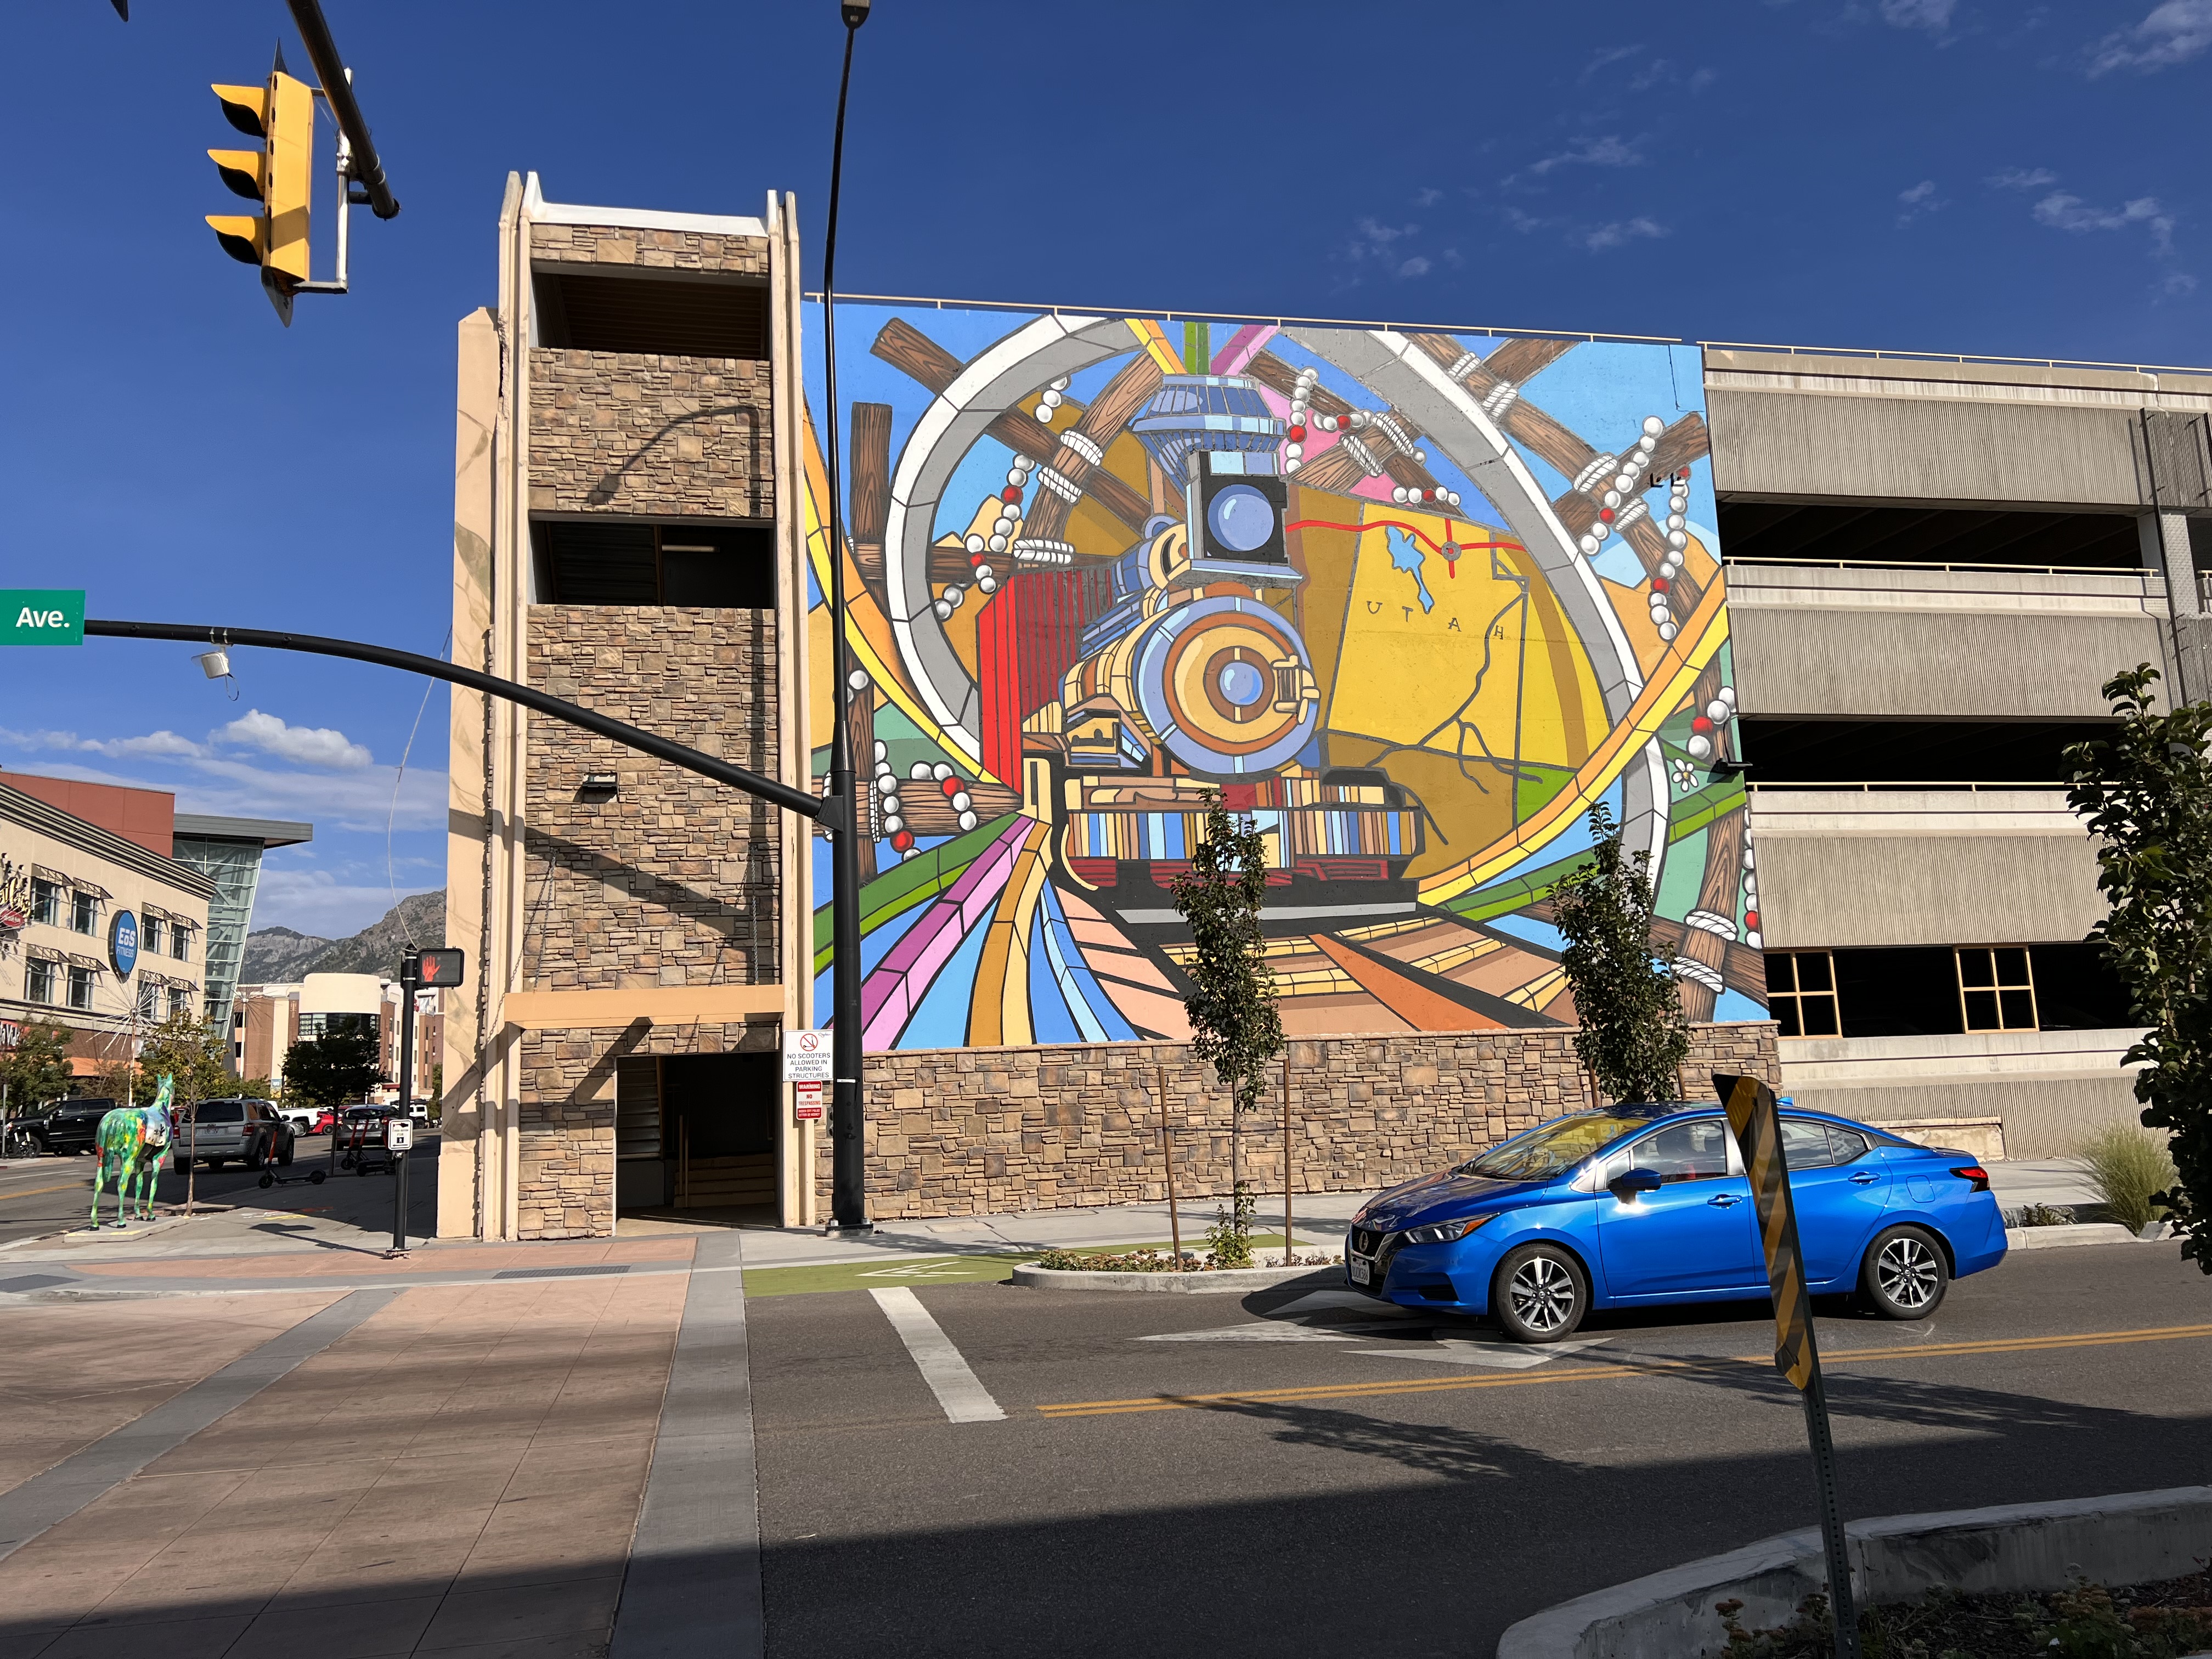 photo of a mural and car in the warm photographic style